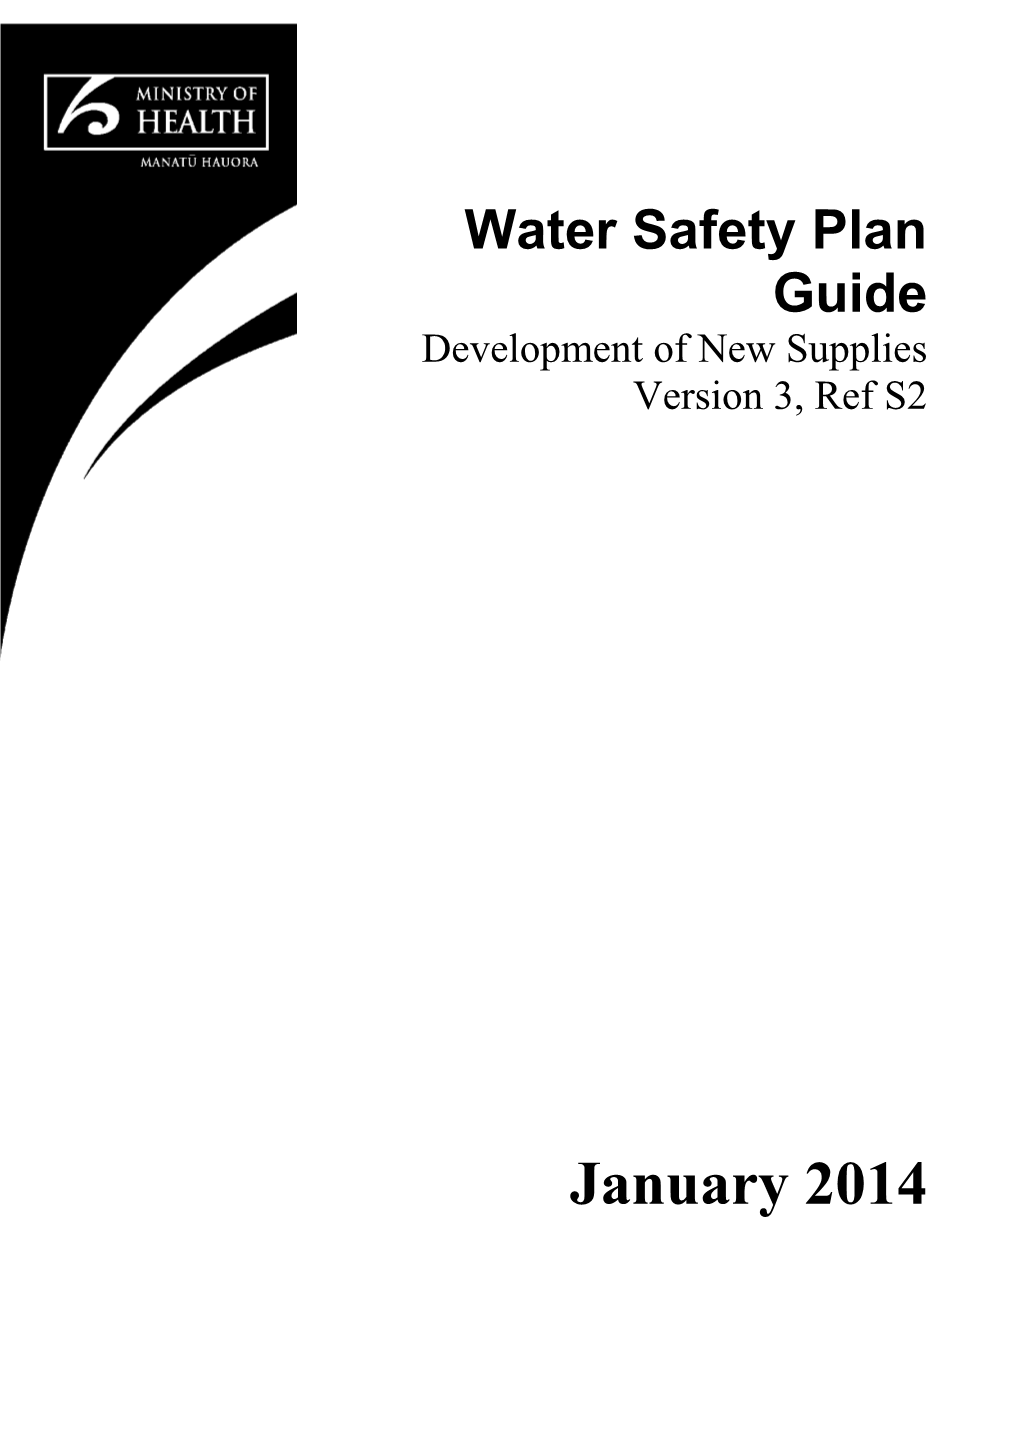 Water Safety Plan Guide: Development of New Supplies